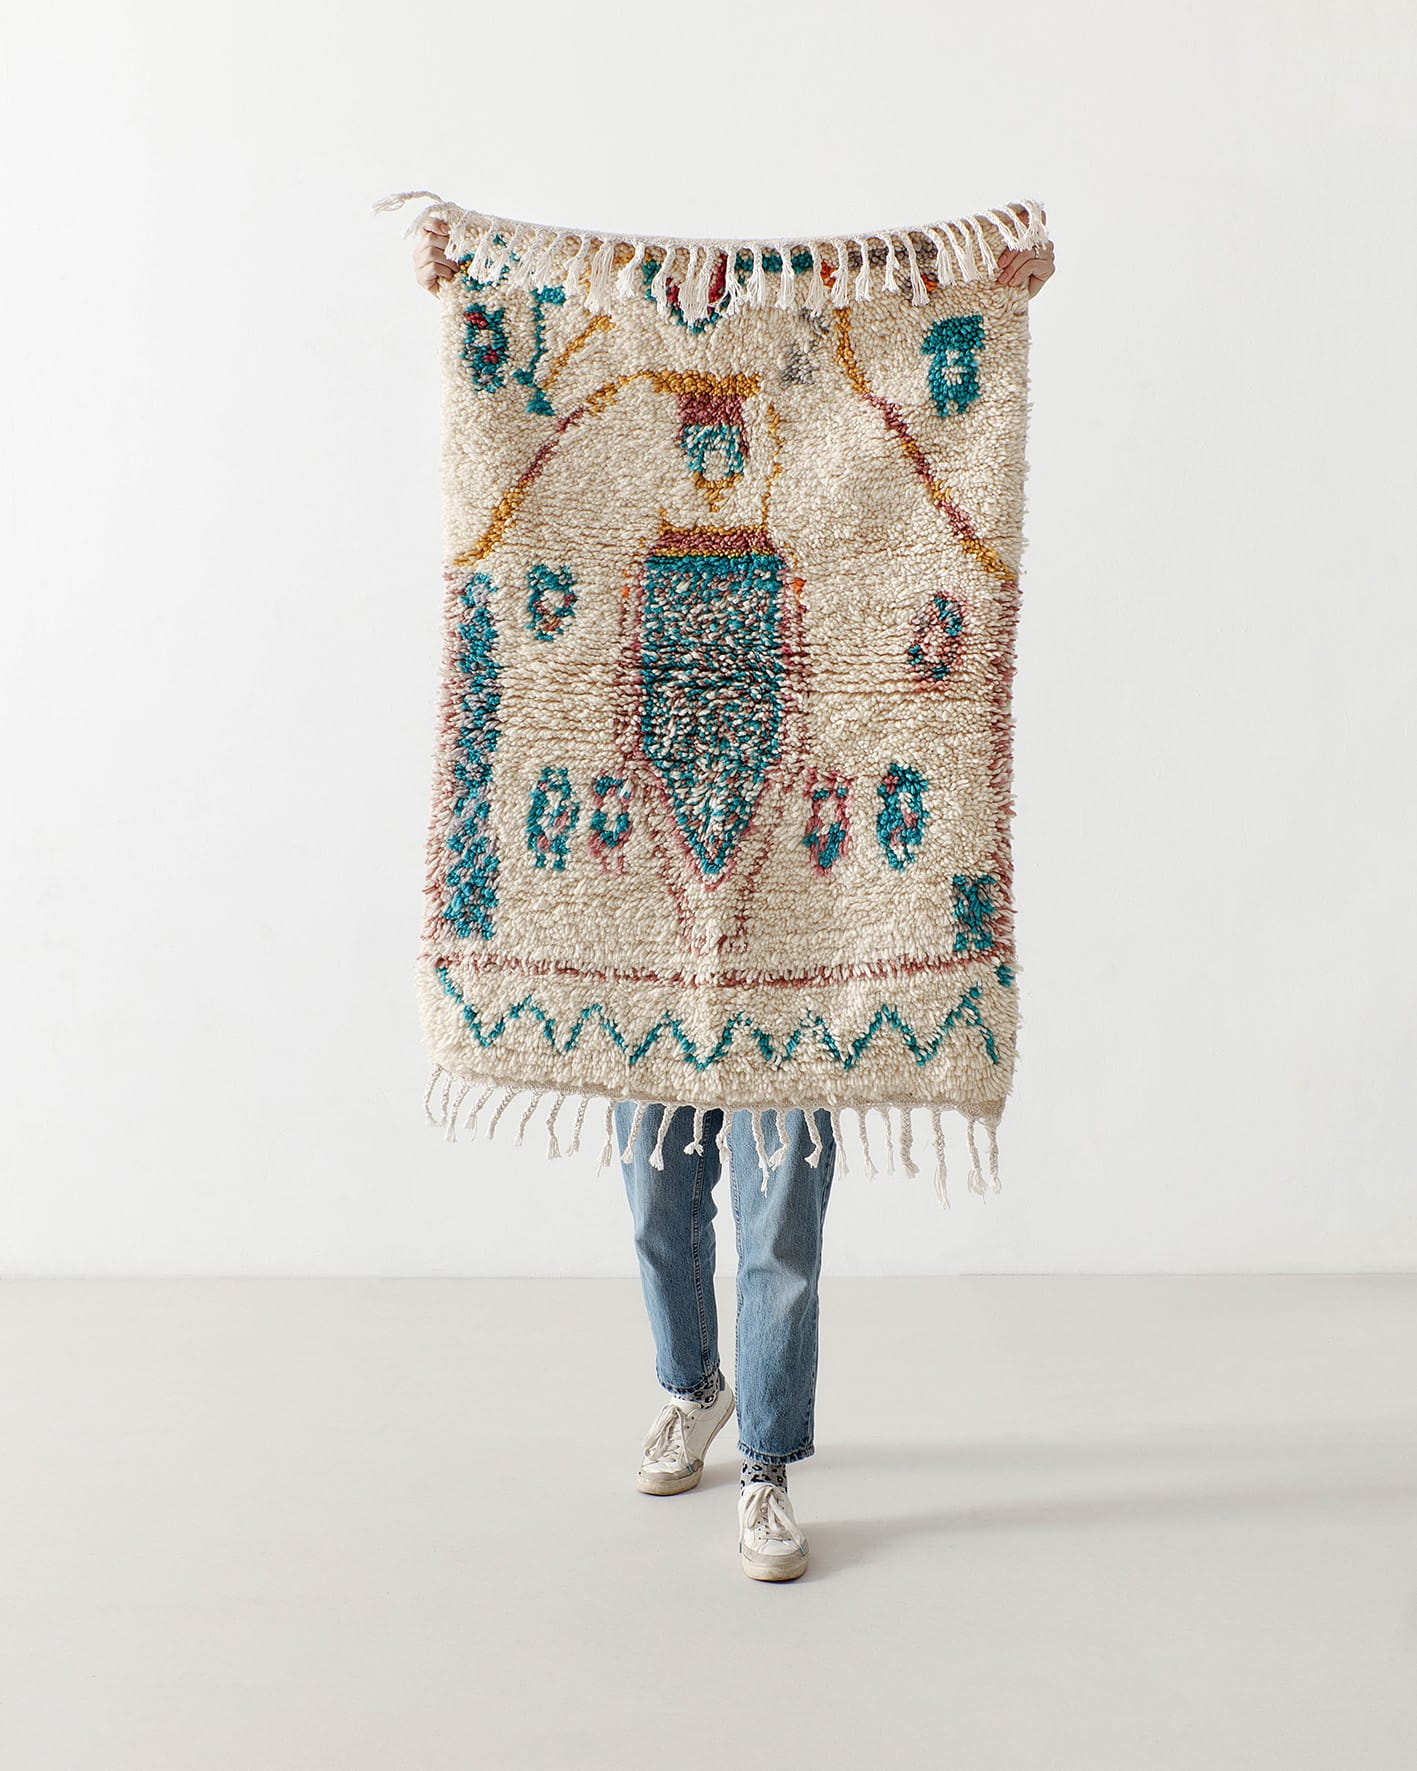 Tiny rug with turquoise motifs